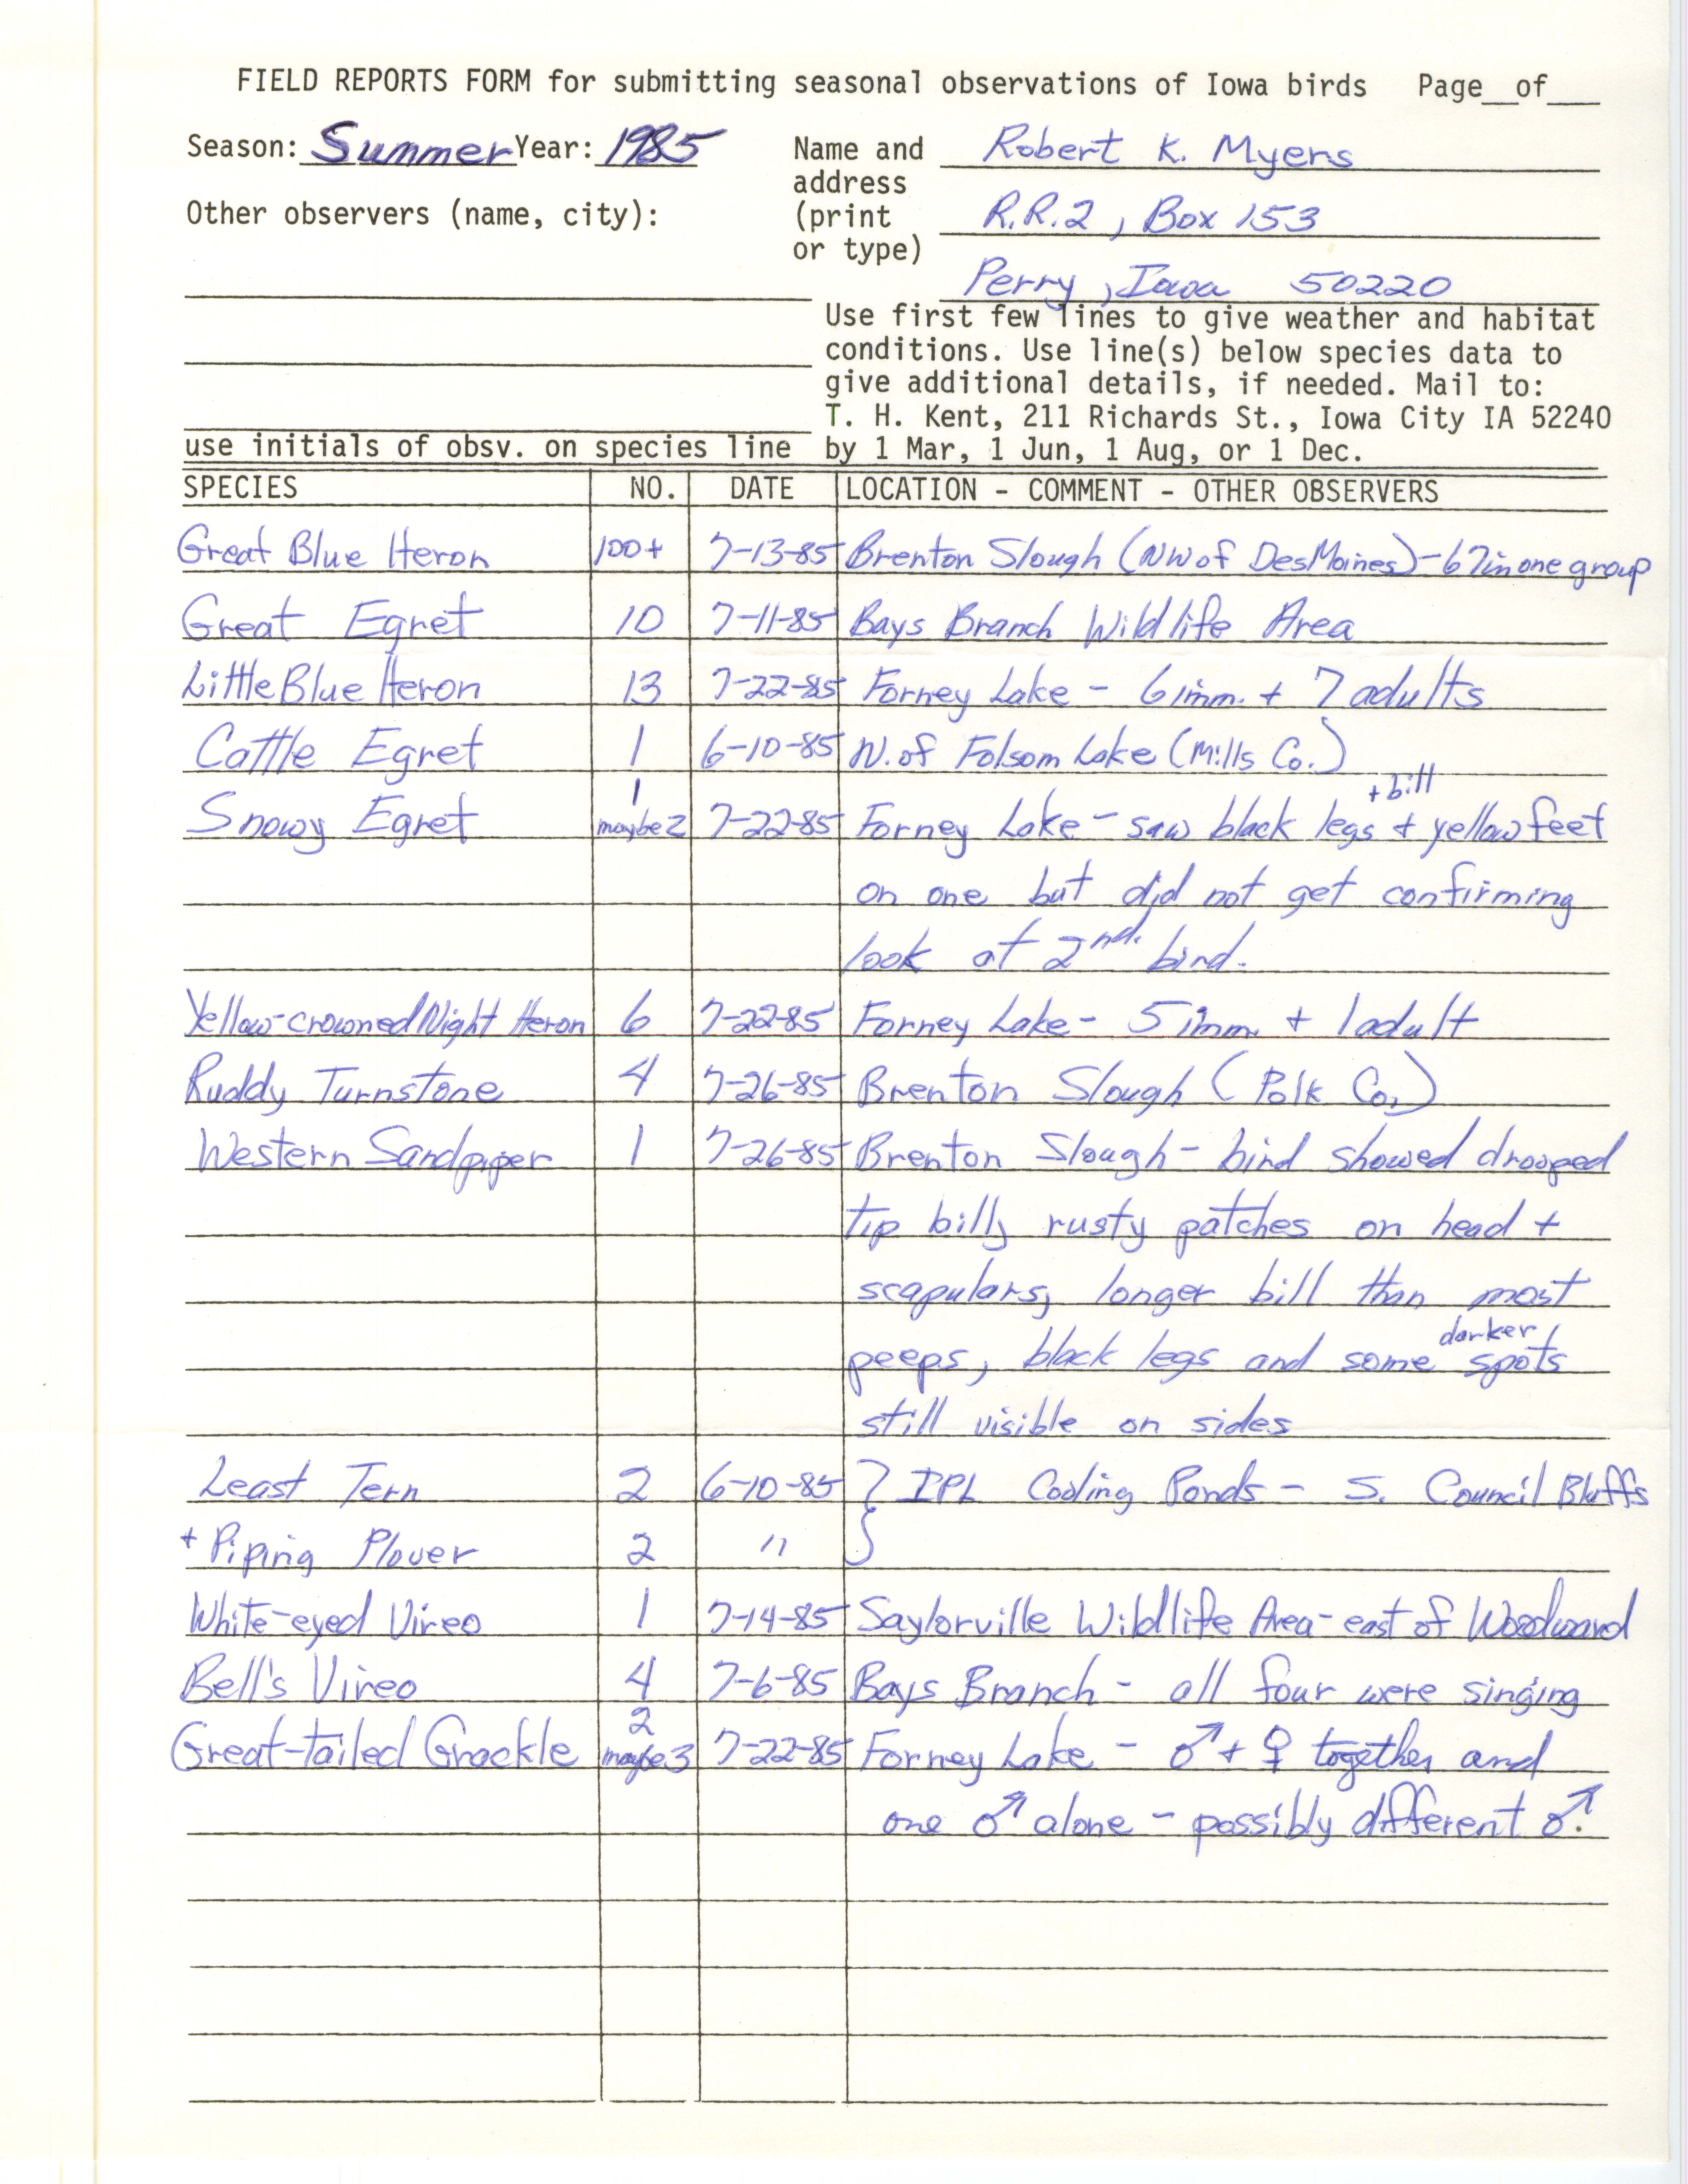 Field reports form for submitting seasonal observations of Iowa birds, Robert K. Myers, summer 1985